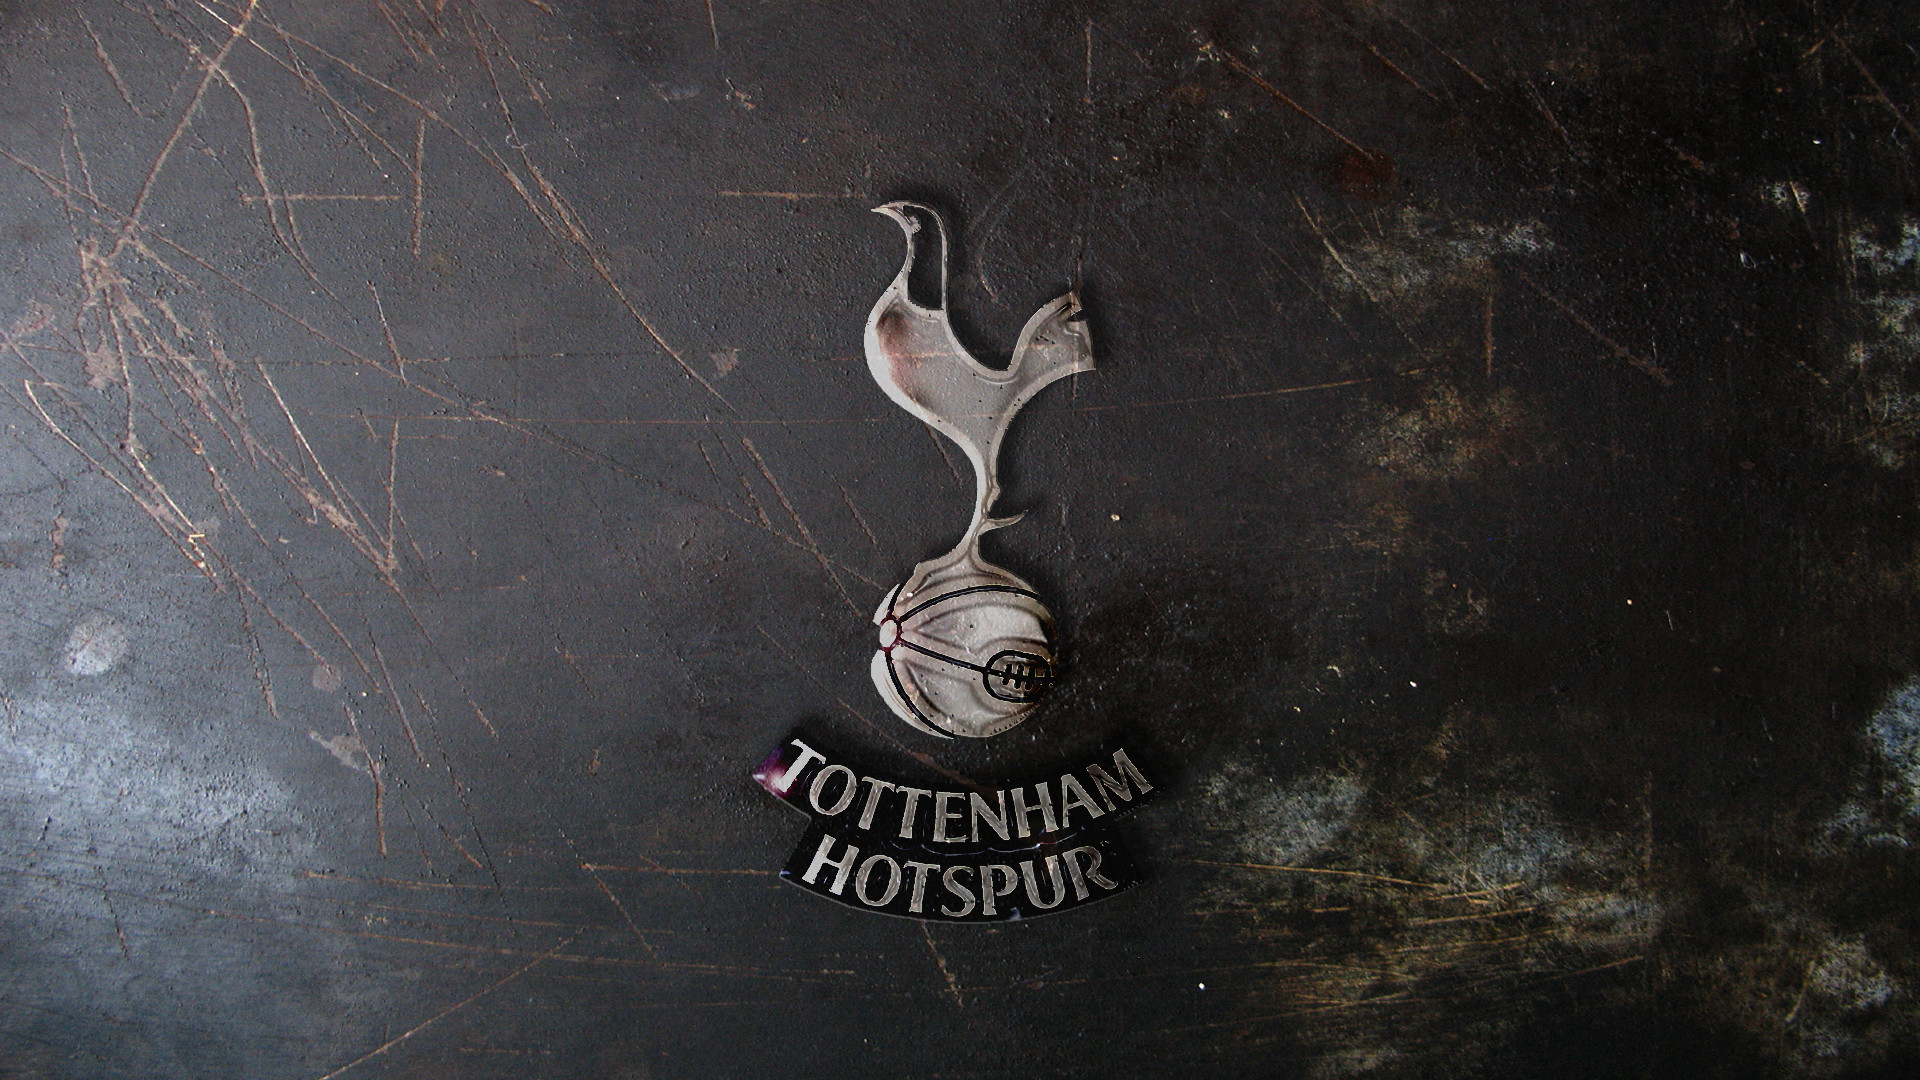 1920x1080 for any and/or all Spurs wallpapers; also for requests